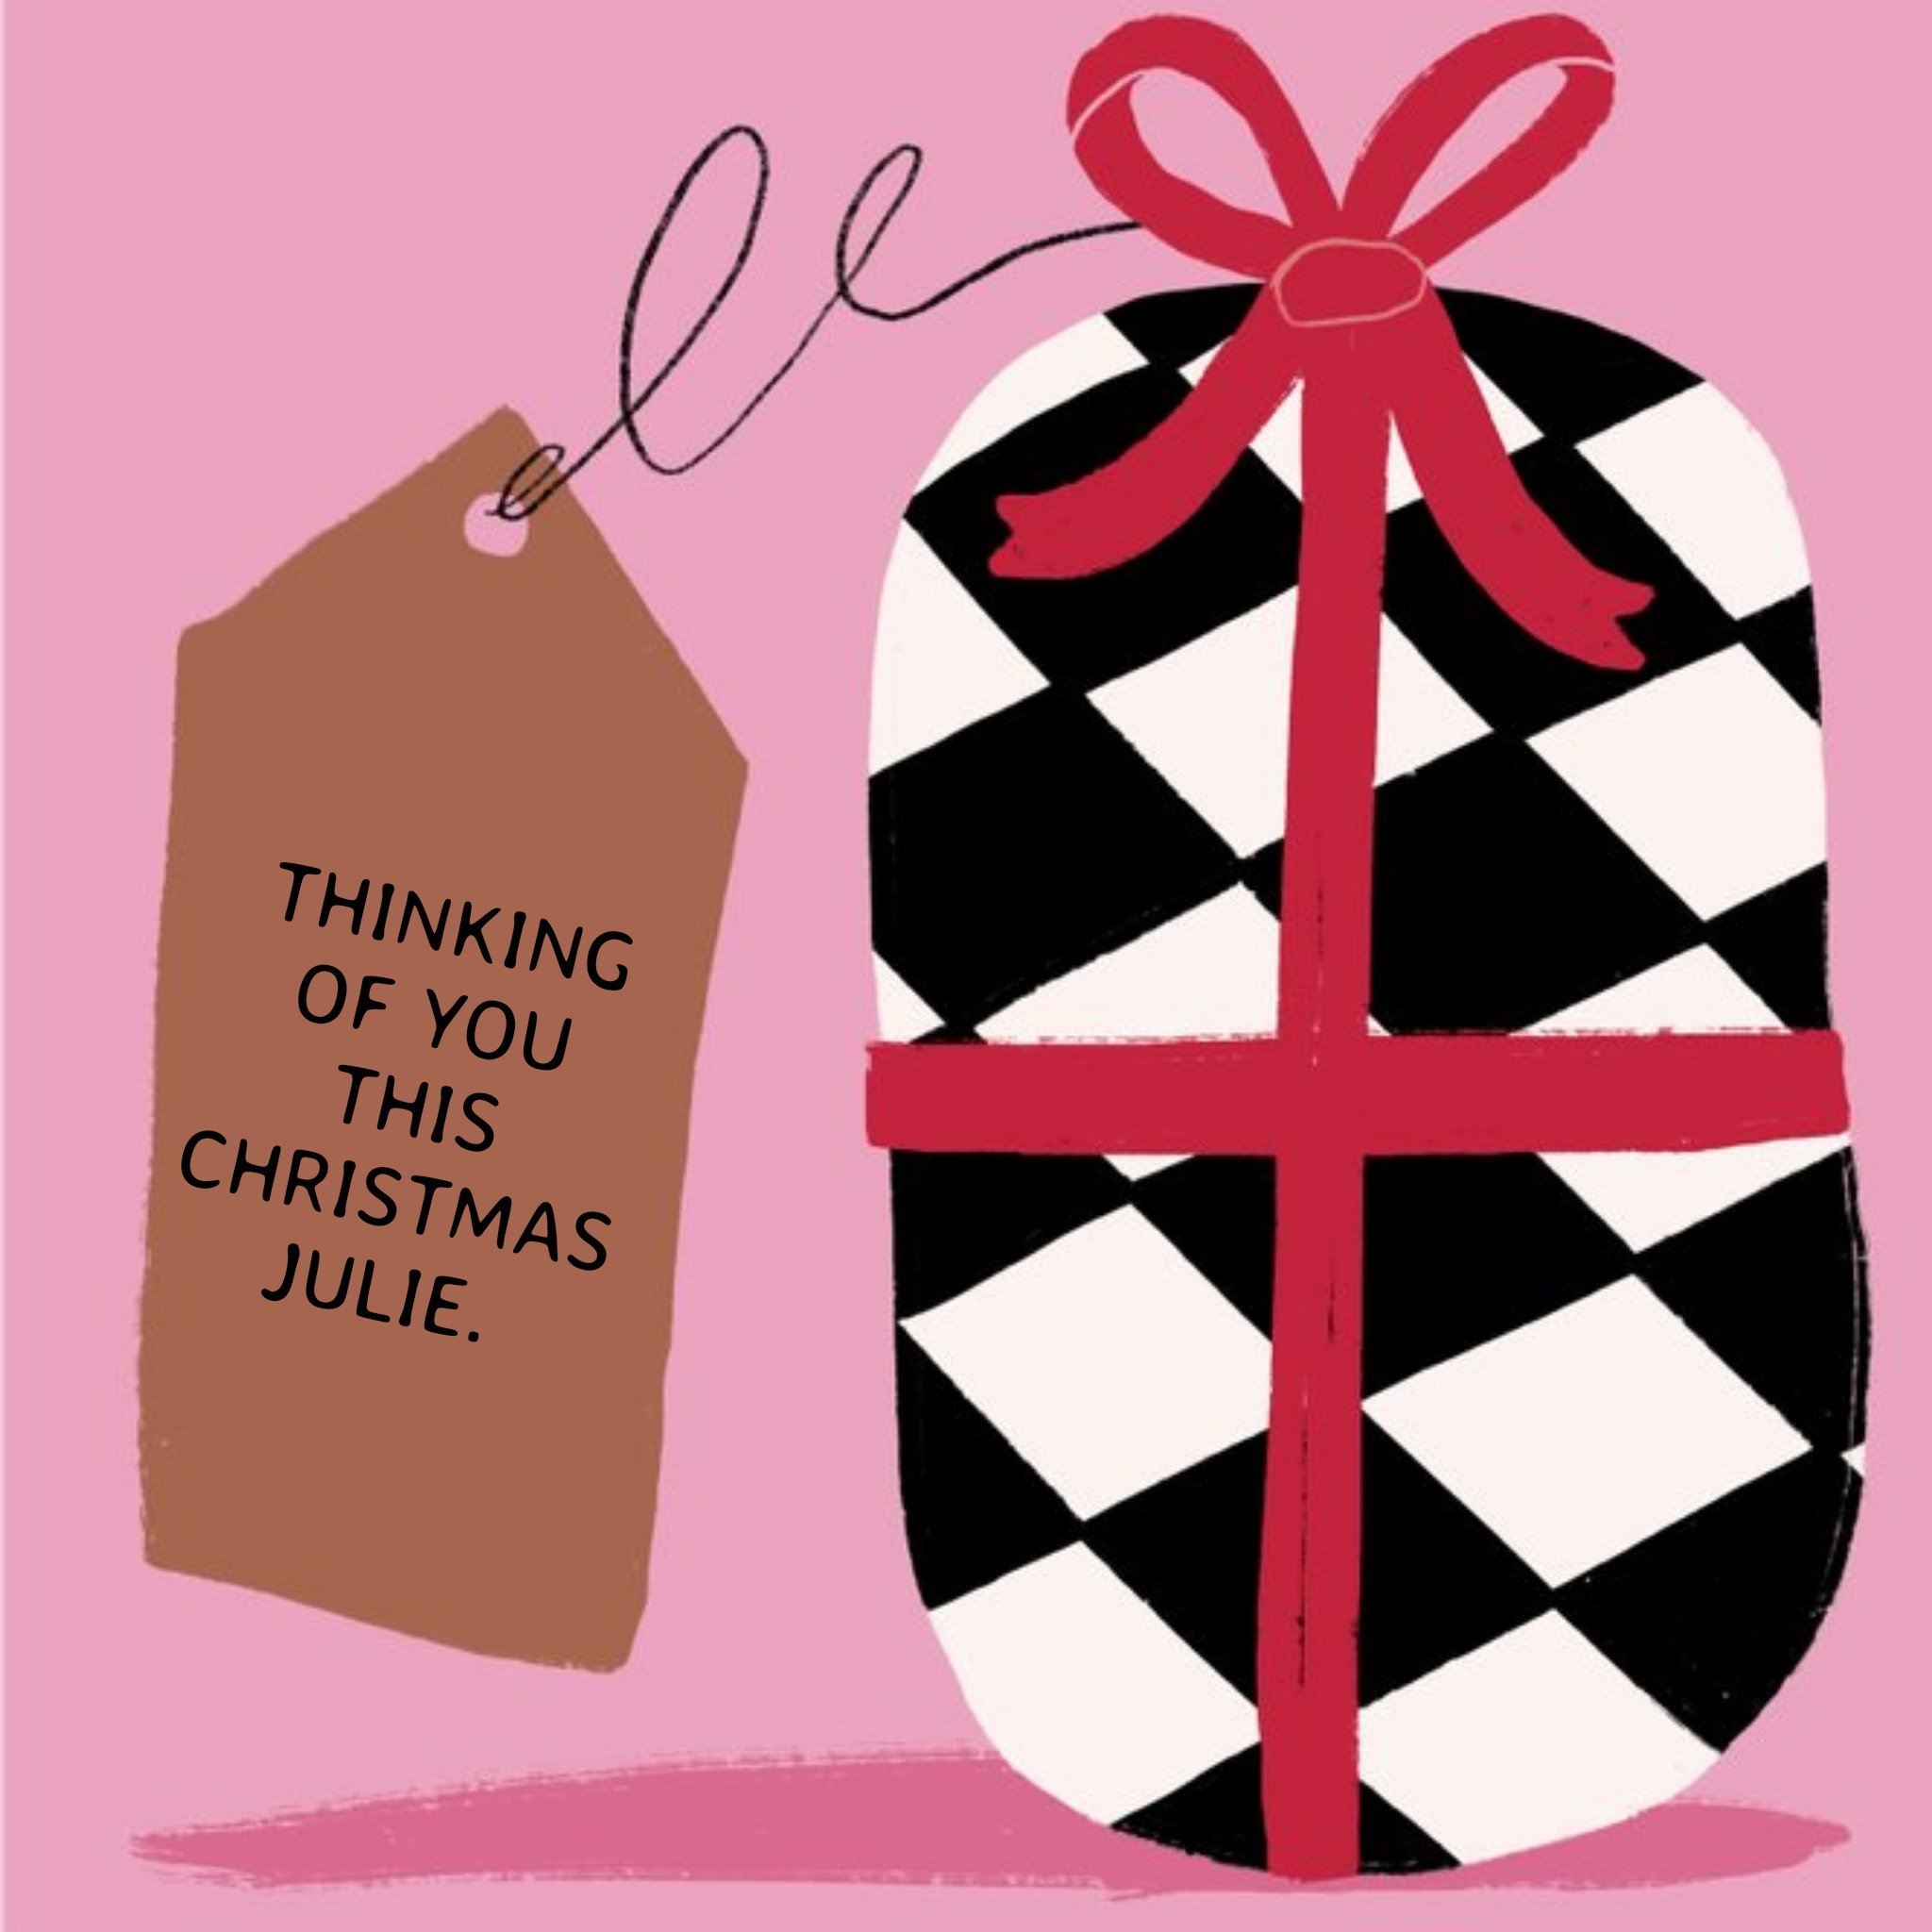 Moonpig Illustration Of A Present With A Chequered Pattern And Tag Christmas Card, Square